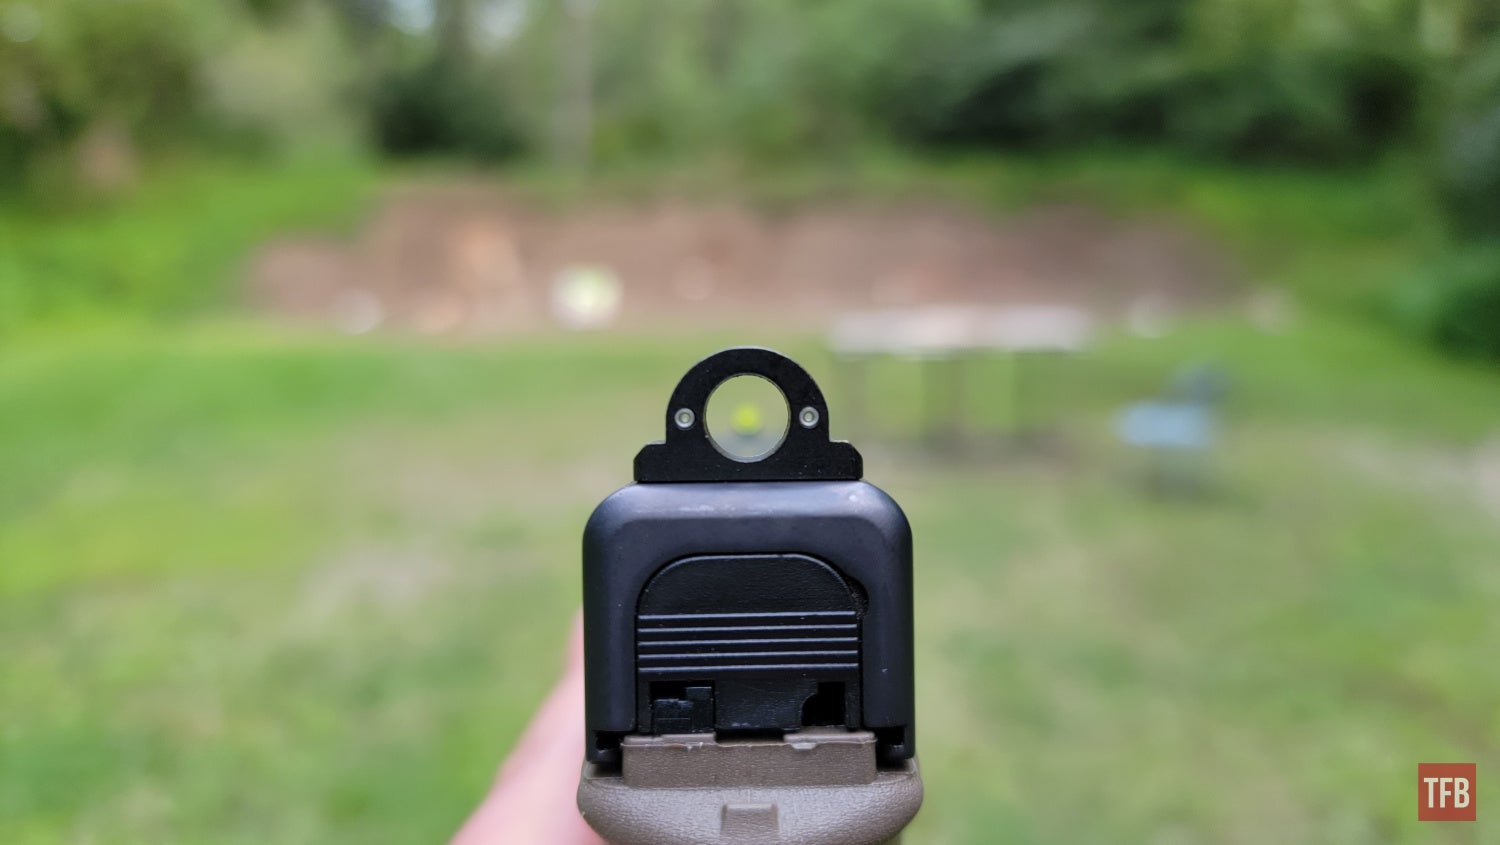 TFB Review: Ameriglo Ghost Ring Sights - Are These Things Even Useful? 